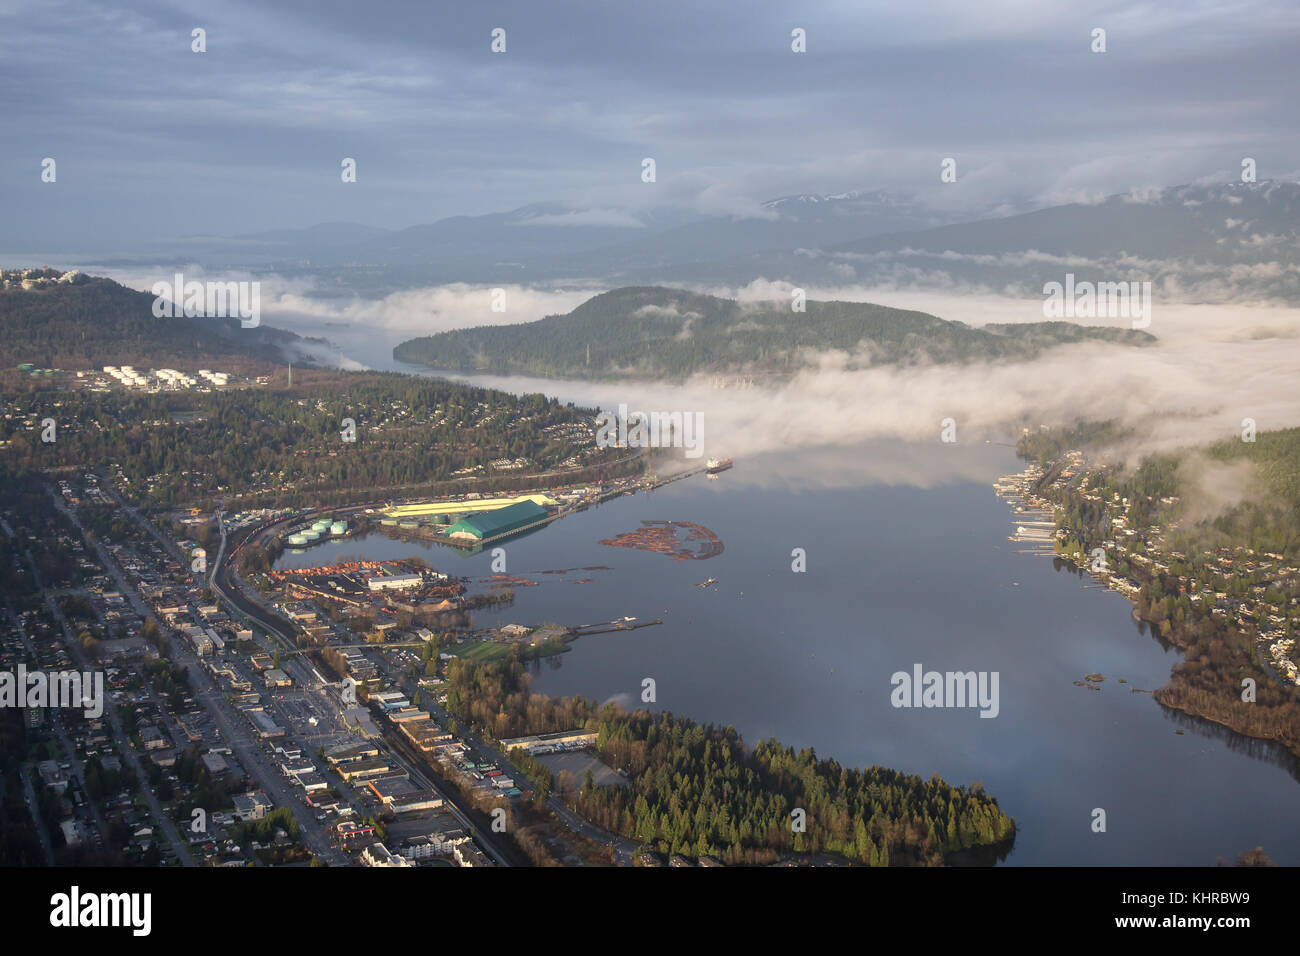 Aerial View of Port Moody, Greater Vancouver, British Columbia, Canada. Taken during a cloudy sunrise with fog patches. Stock Photo